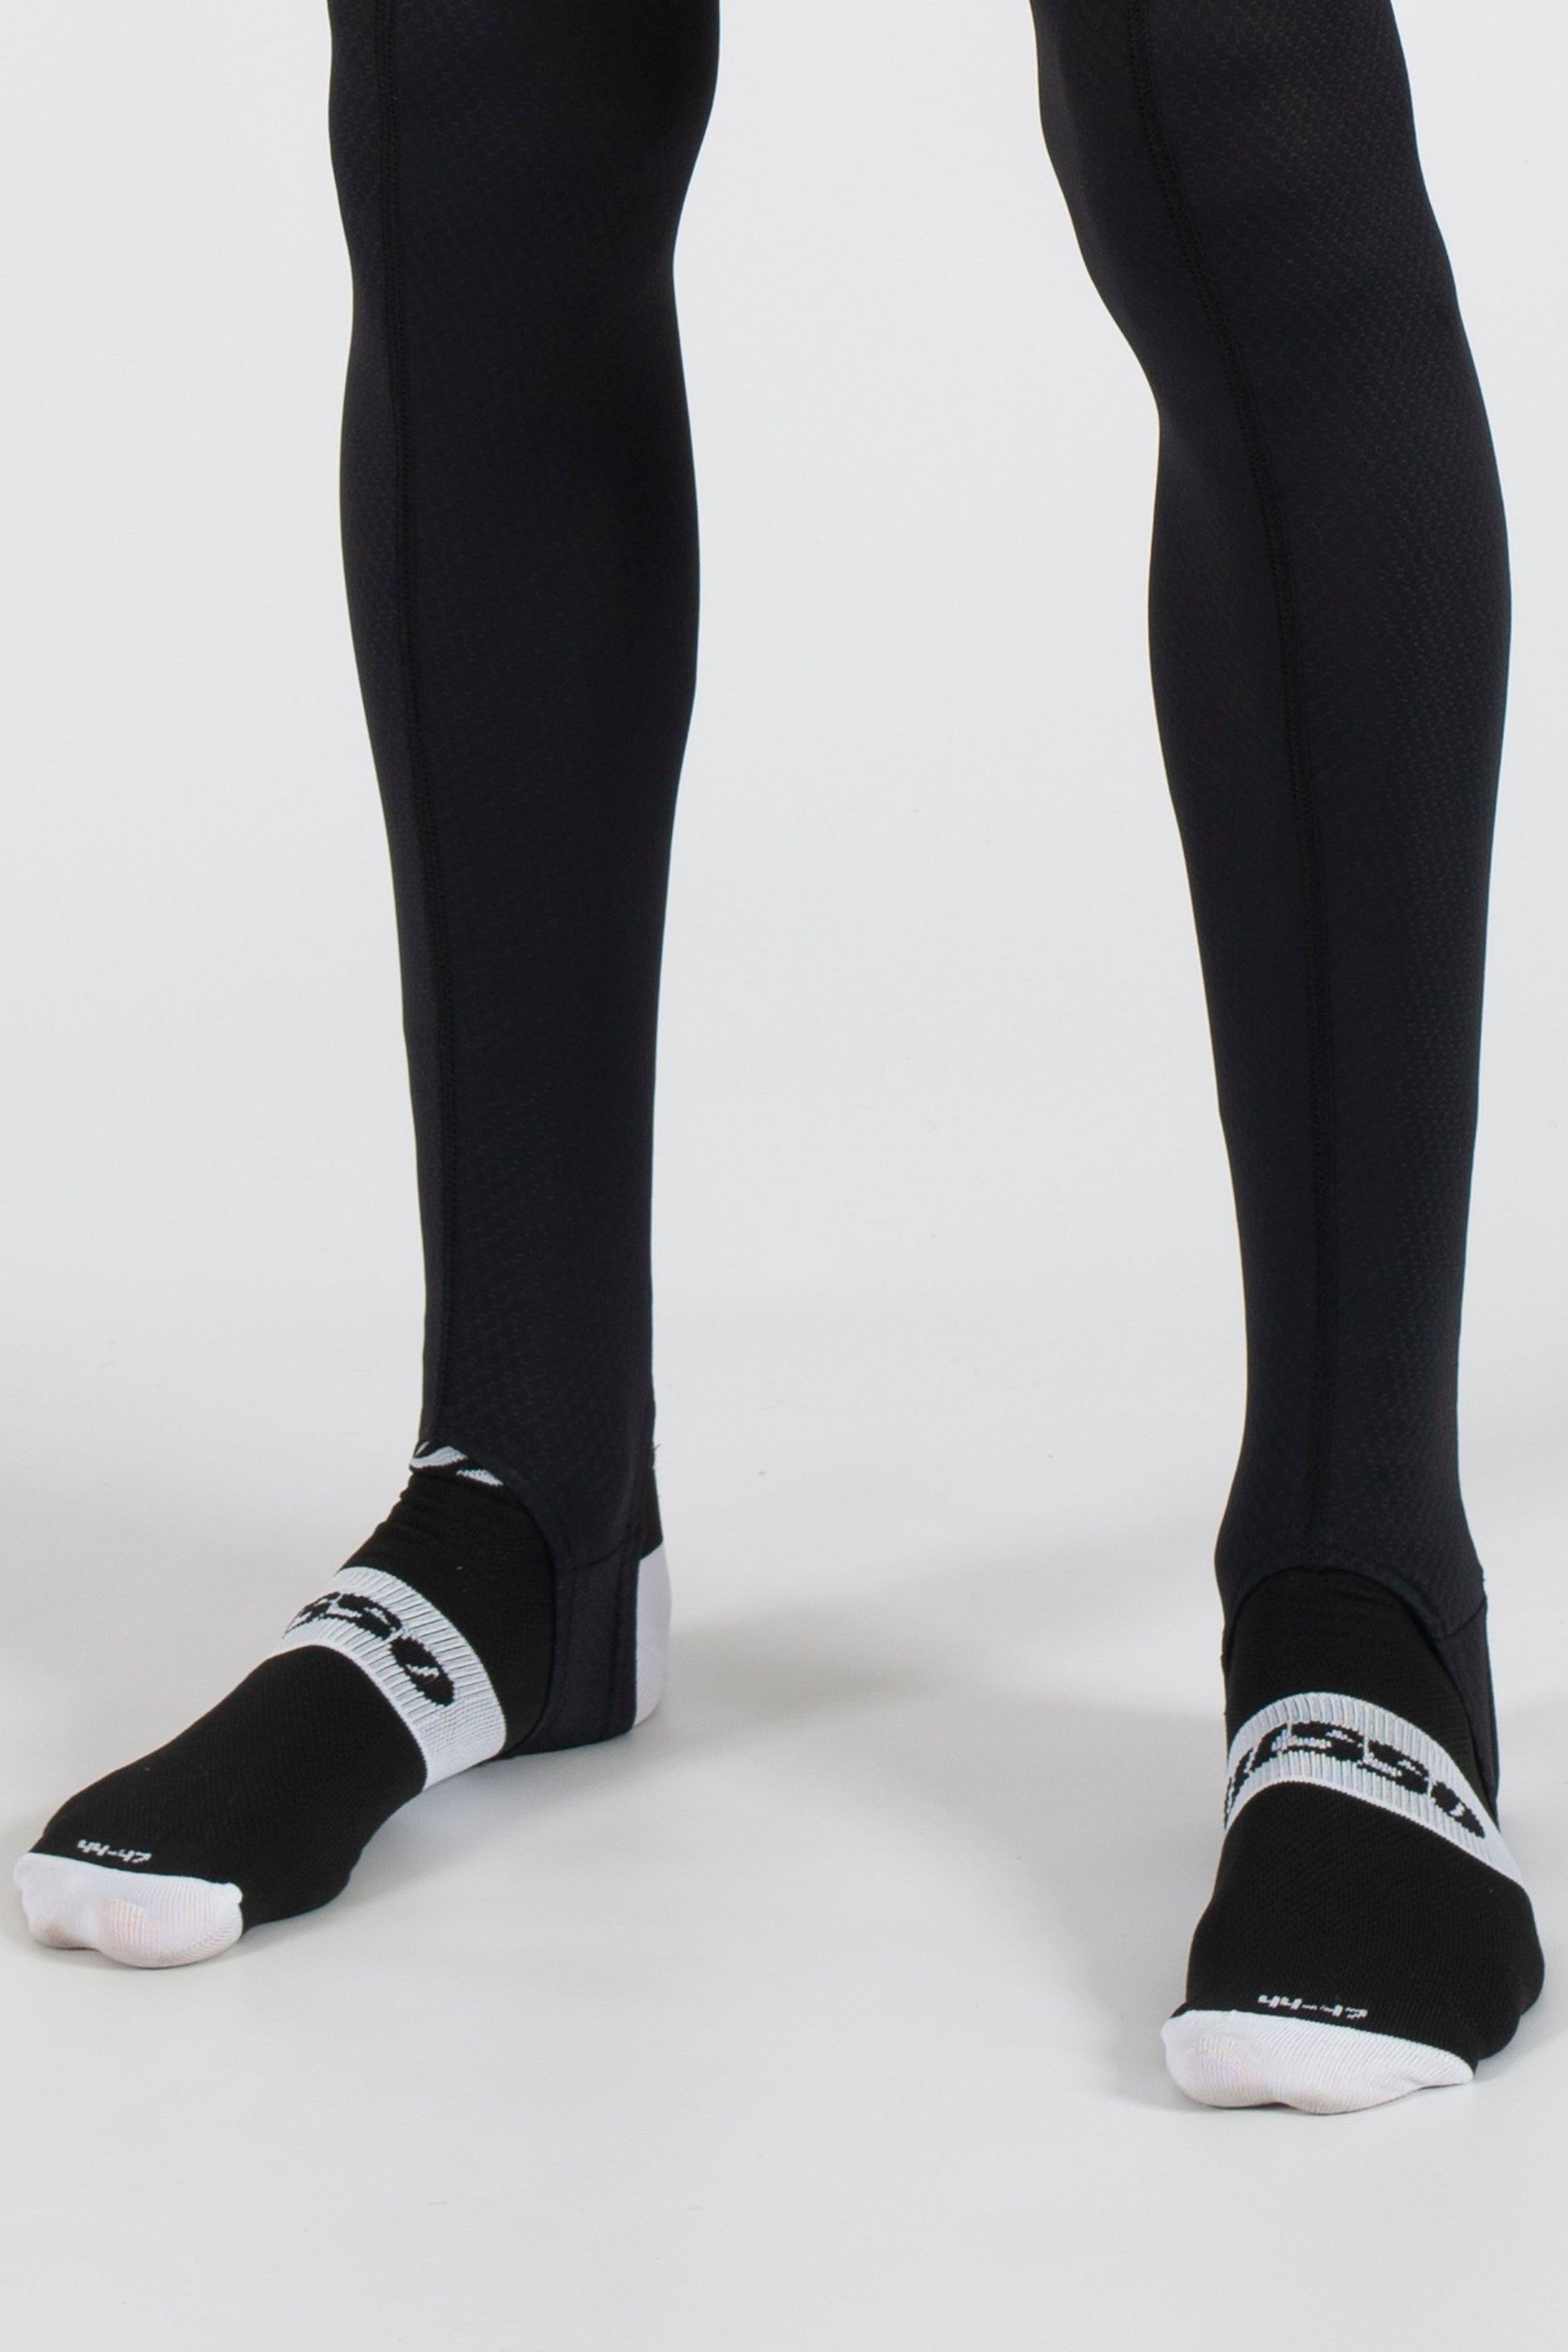 Cooltech Bibtights - Lusso Cycle Wear